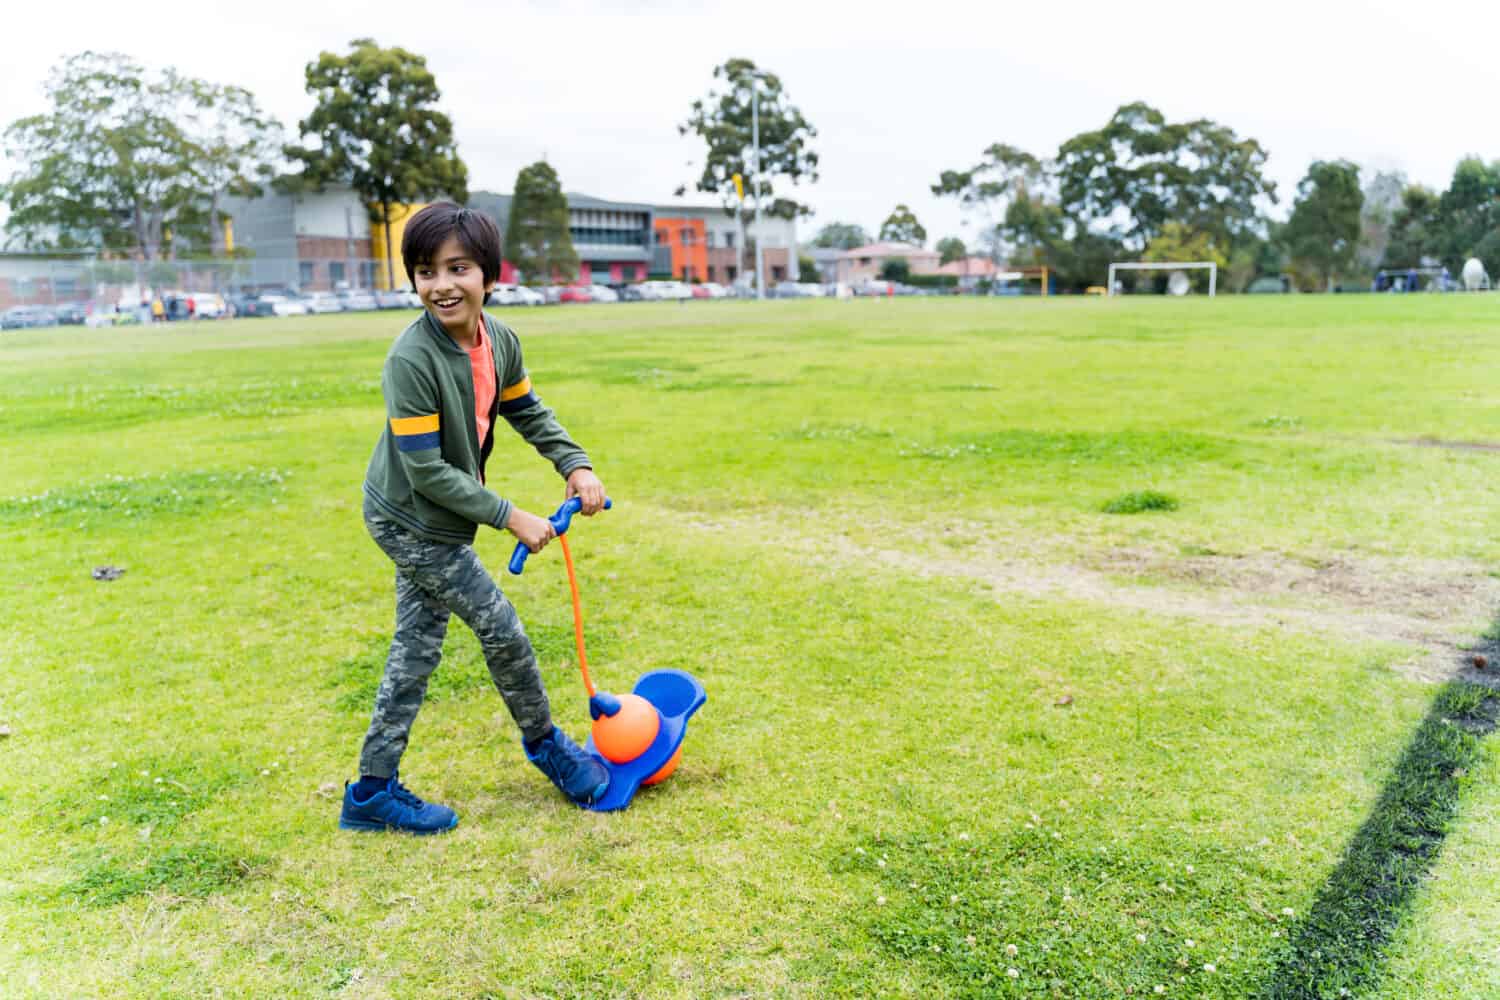 Indian kid playing with pogo toy at park in Australia. Happy young boy playing outdoors.